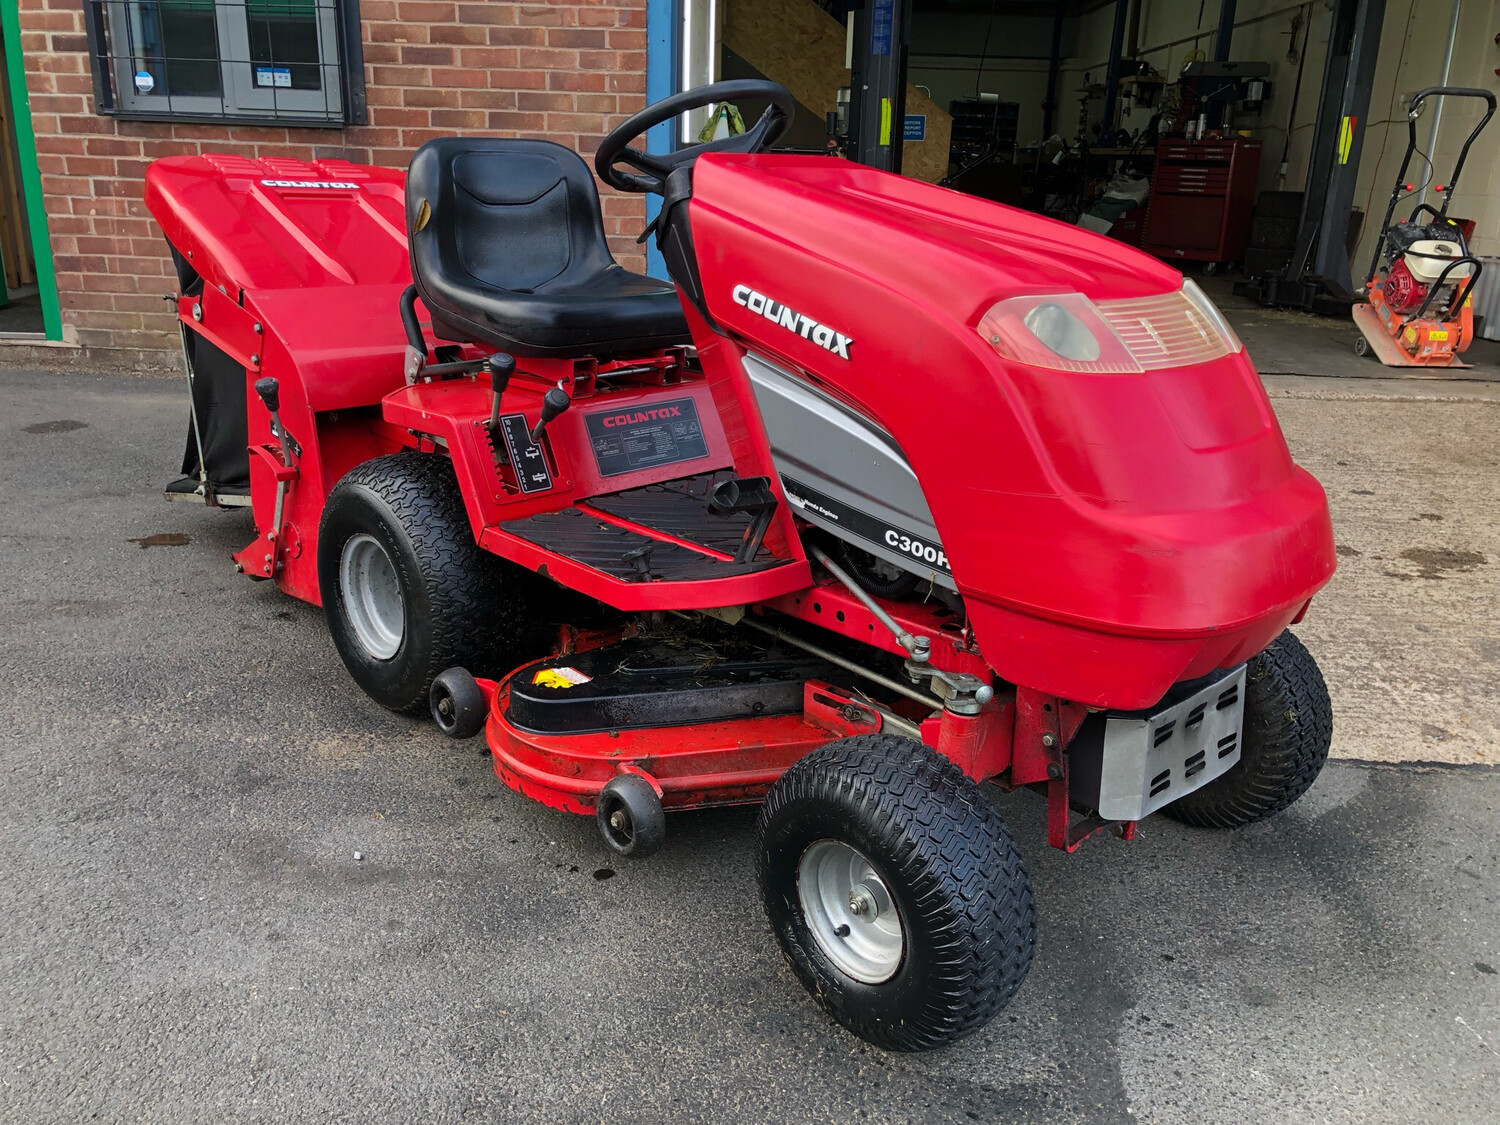 Countax C300H Ride On Mower